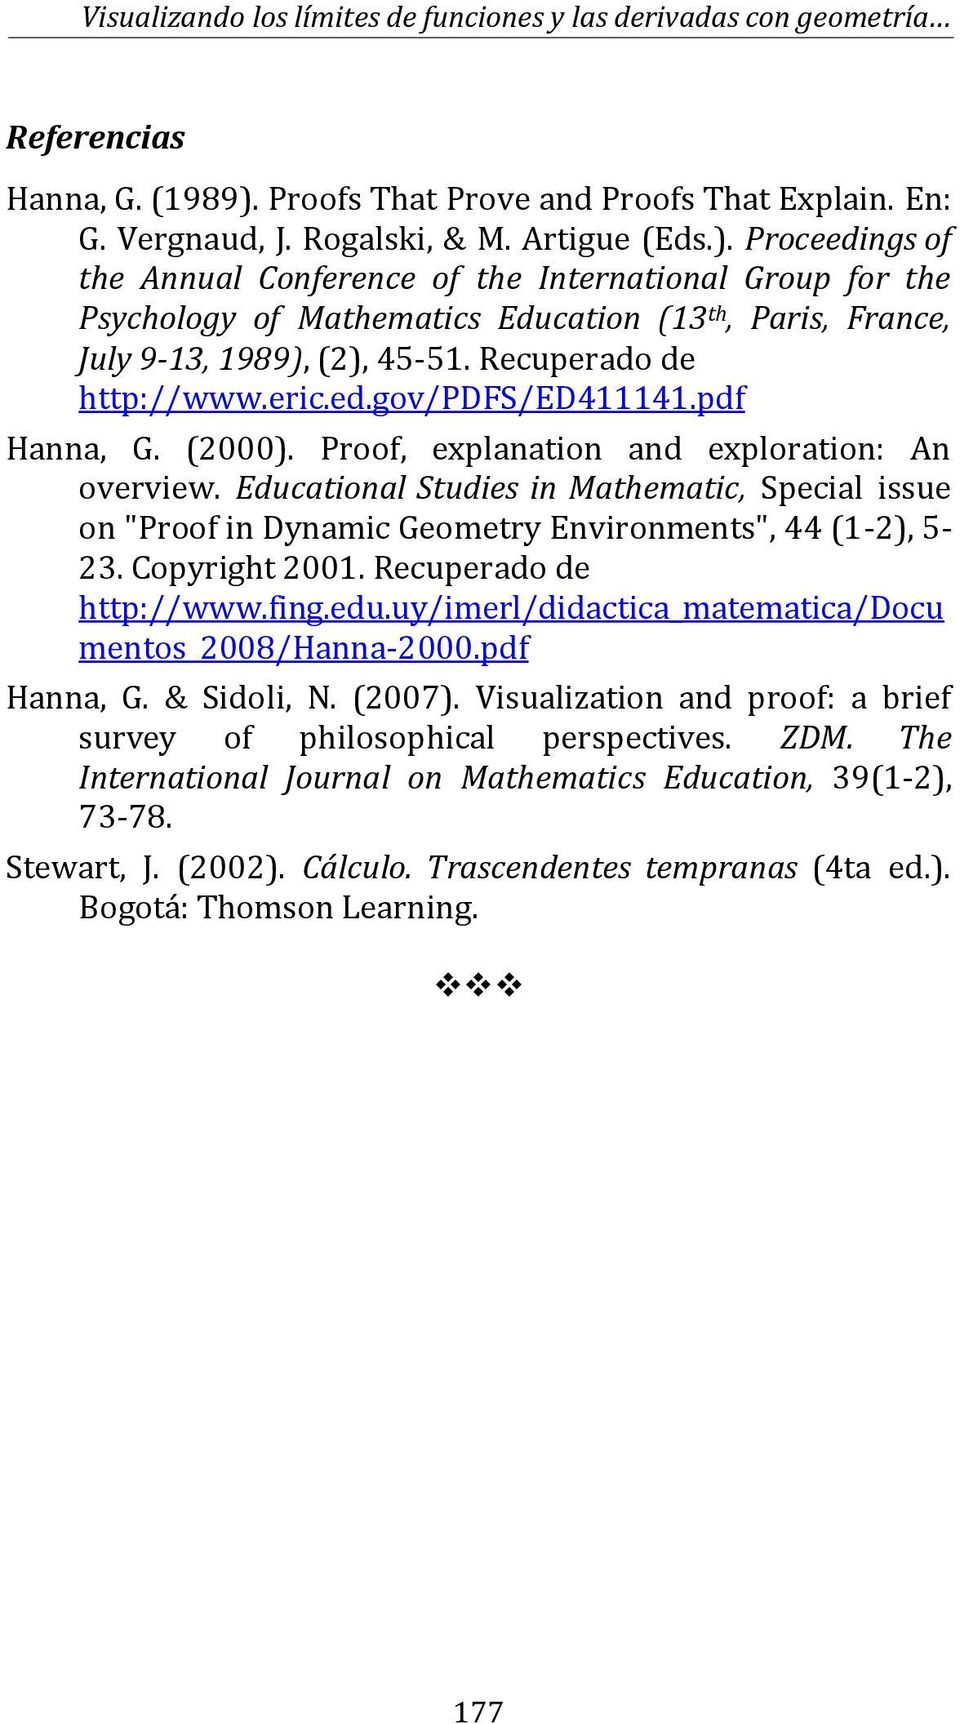 Proceedings of the Annual Conference of the International Group for the Psychology of Mathematics Education (13 th, Paris, France, July 9-13, 1989), (2), 45-51. Recuperado de http://www.eric.ed.gov/pdfs/ed411141.